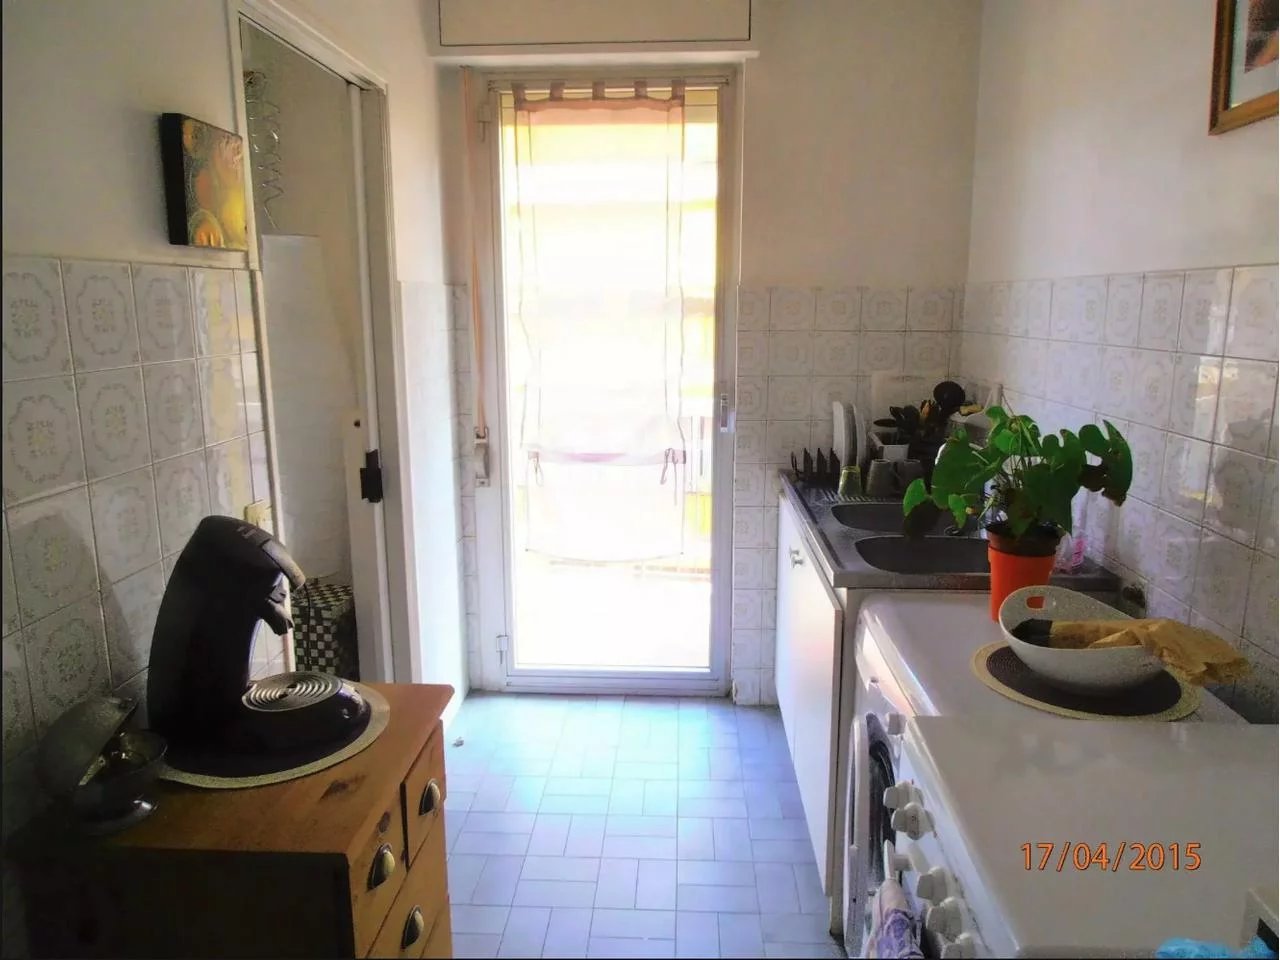 Appartement  1 Rooms 31.27m2  for sale   113 000 €